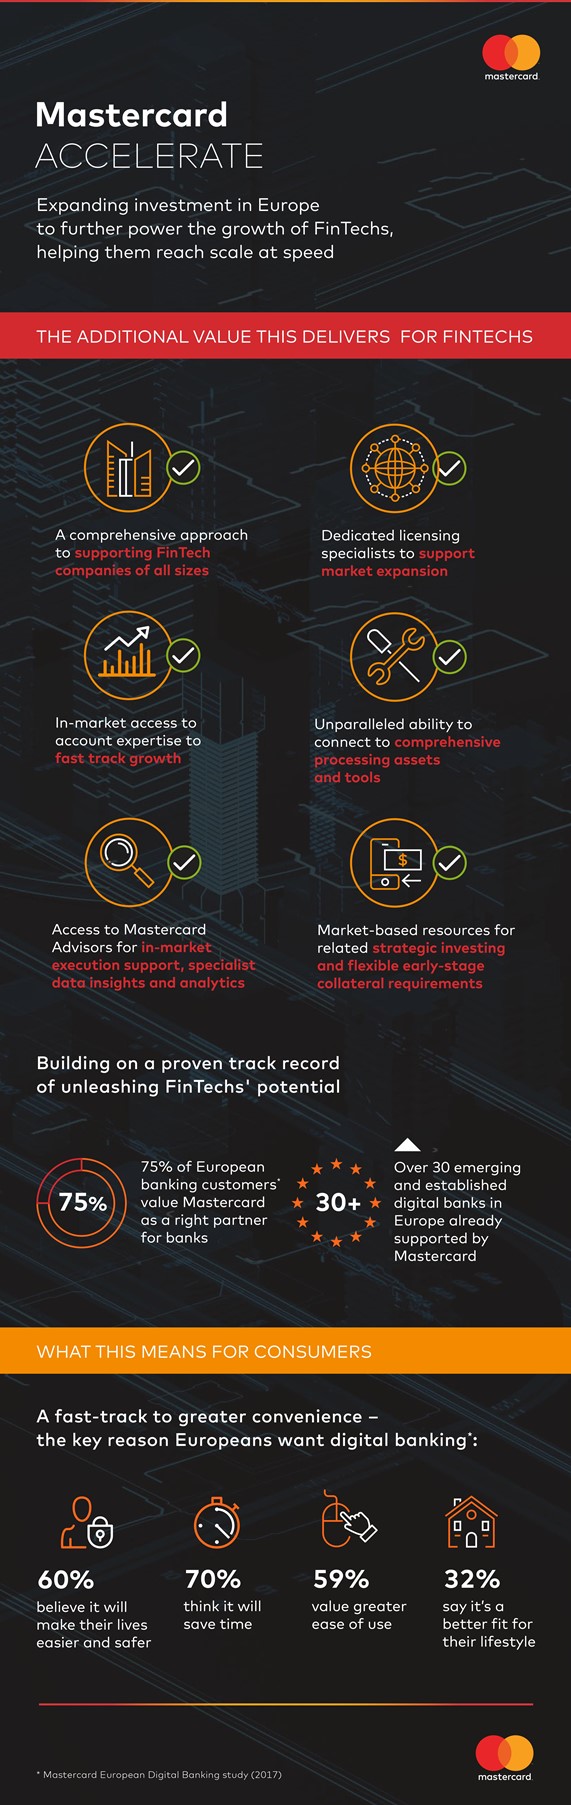 Mastercard Accelerate Launch Infographic